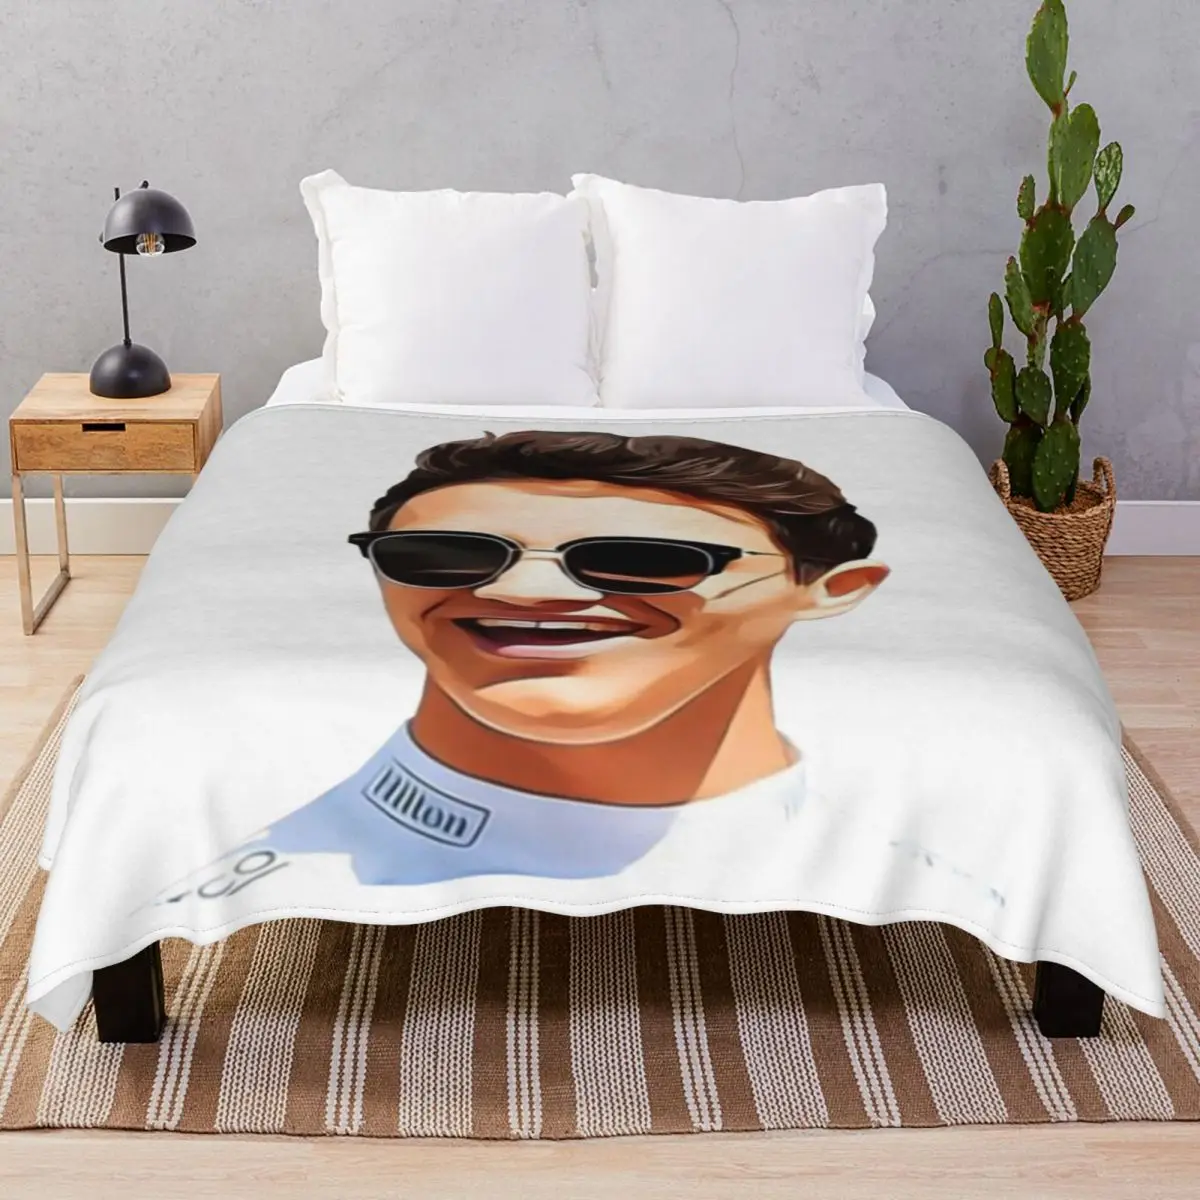 Lando Norris Pretty Face Blankets Flannel Autumn Soft Throw Blanket for Bedding Sofa Travel Office